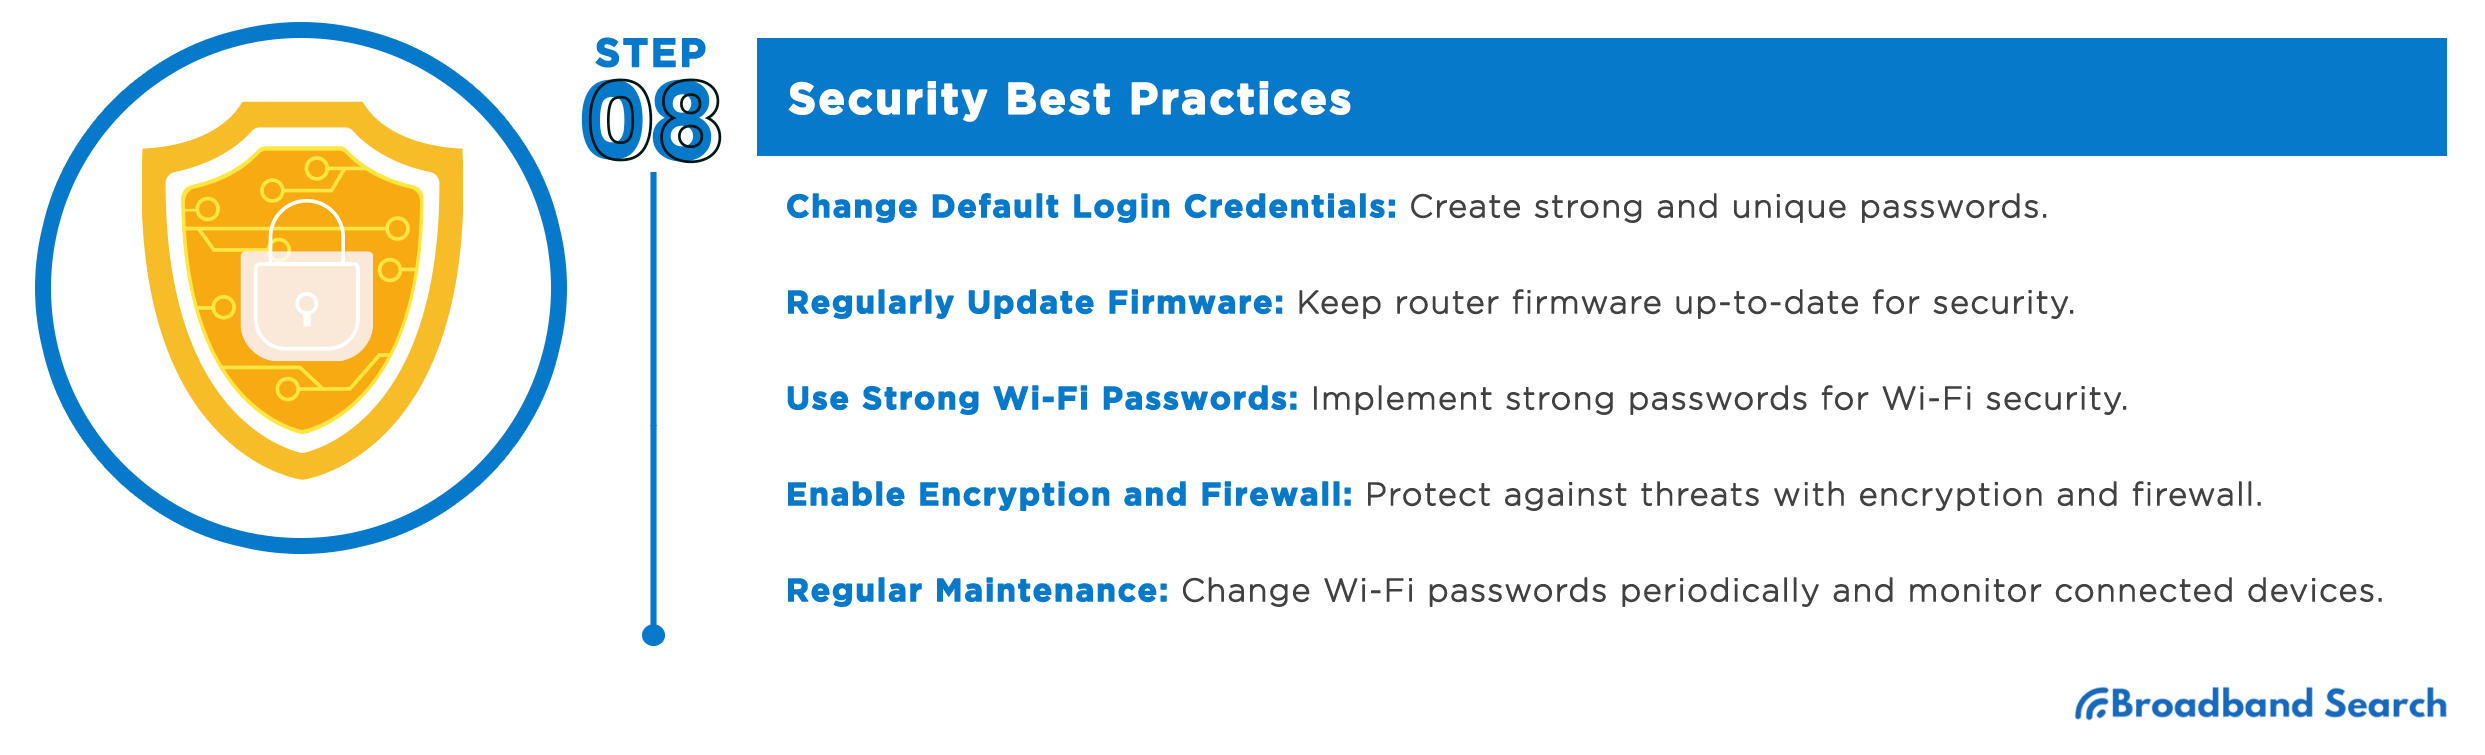 List of Best Practices to secure your network